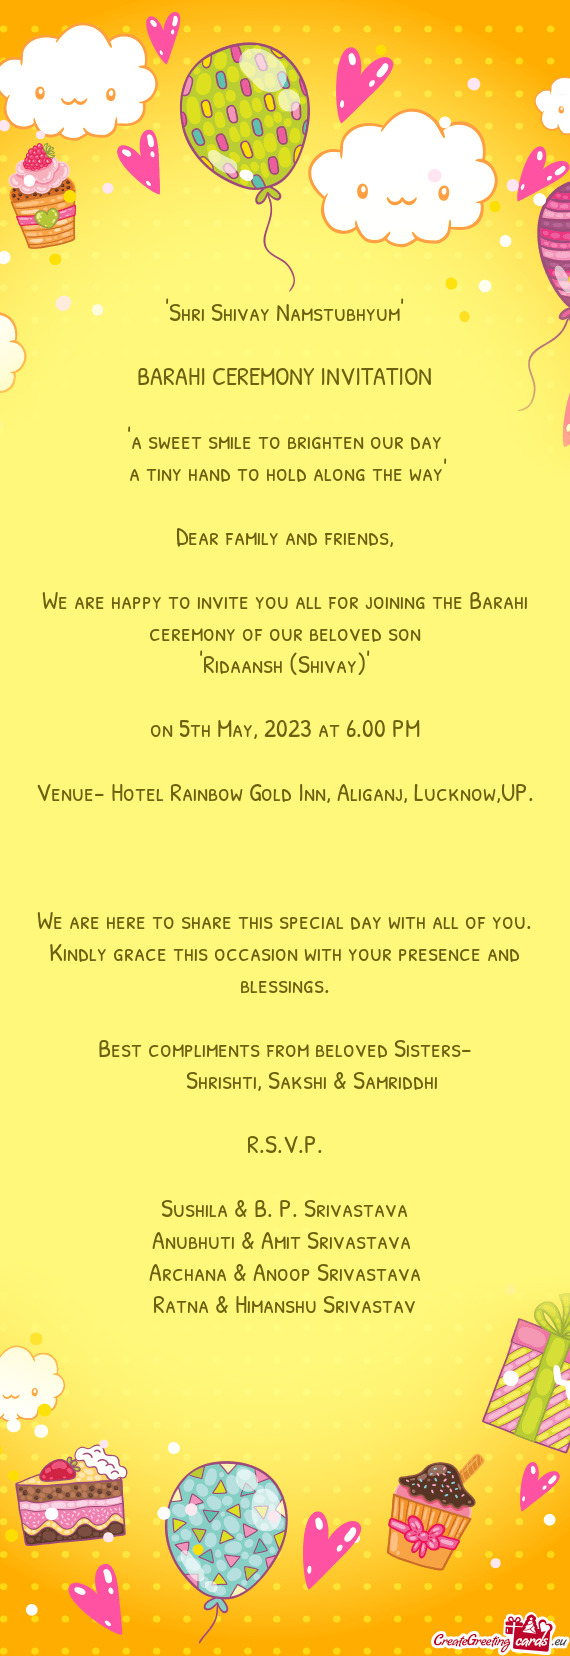 We are happy to invite you all for joining the Barahi ceremony of our beloved son